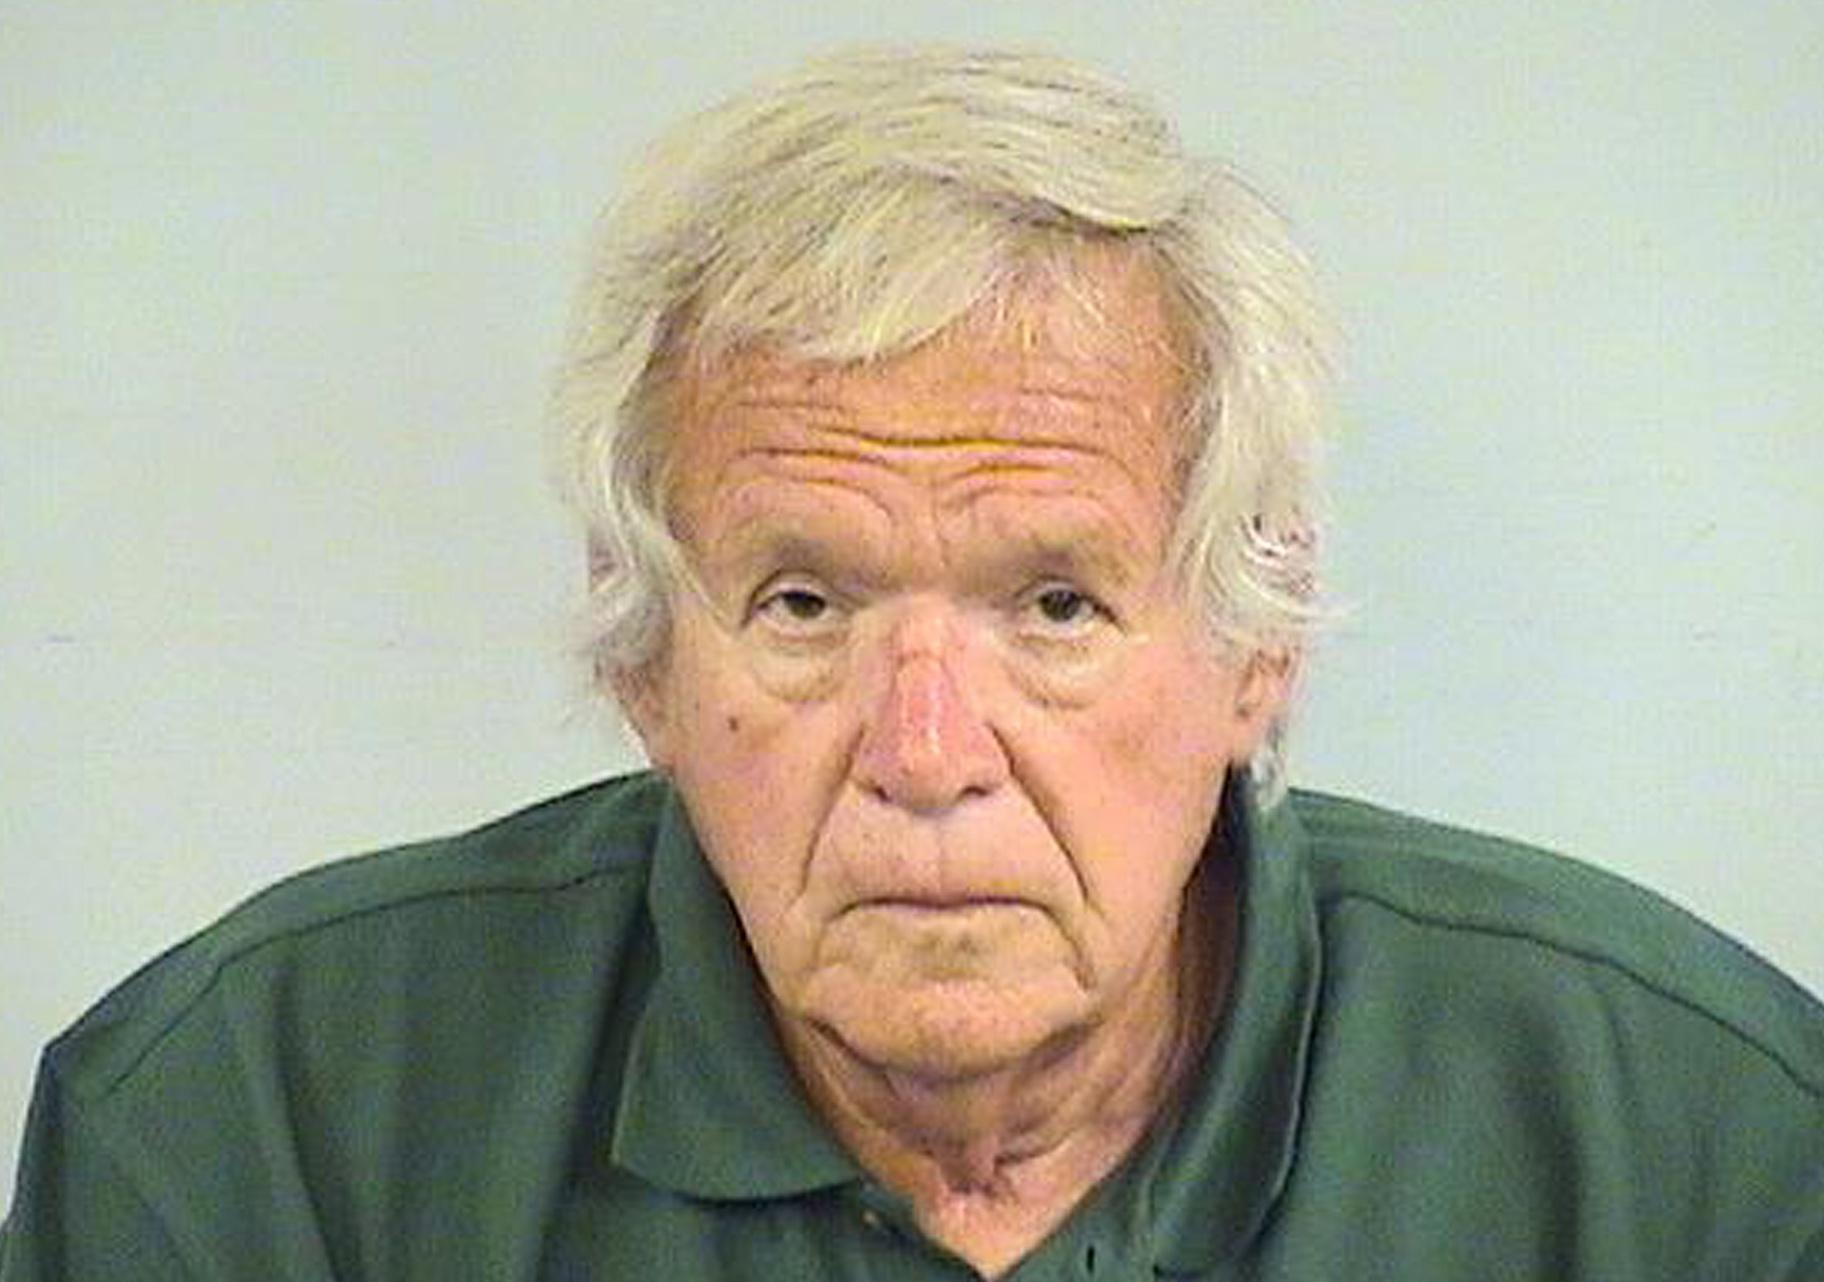 This undated file photo provided by the Lake County Sheriff’s Department shows ex-U.S. House Speaker Dennis Hastert. (Lake County Sheriff Department via AP File)